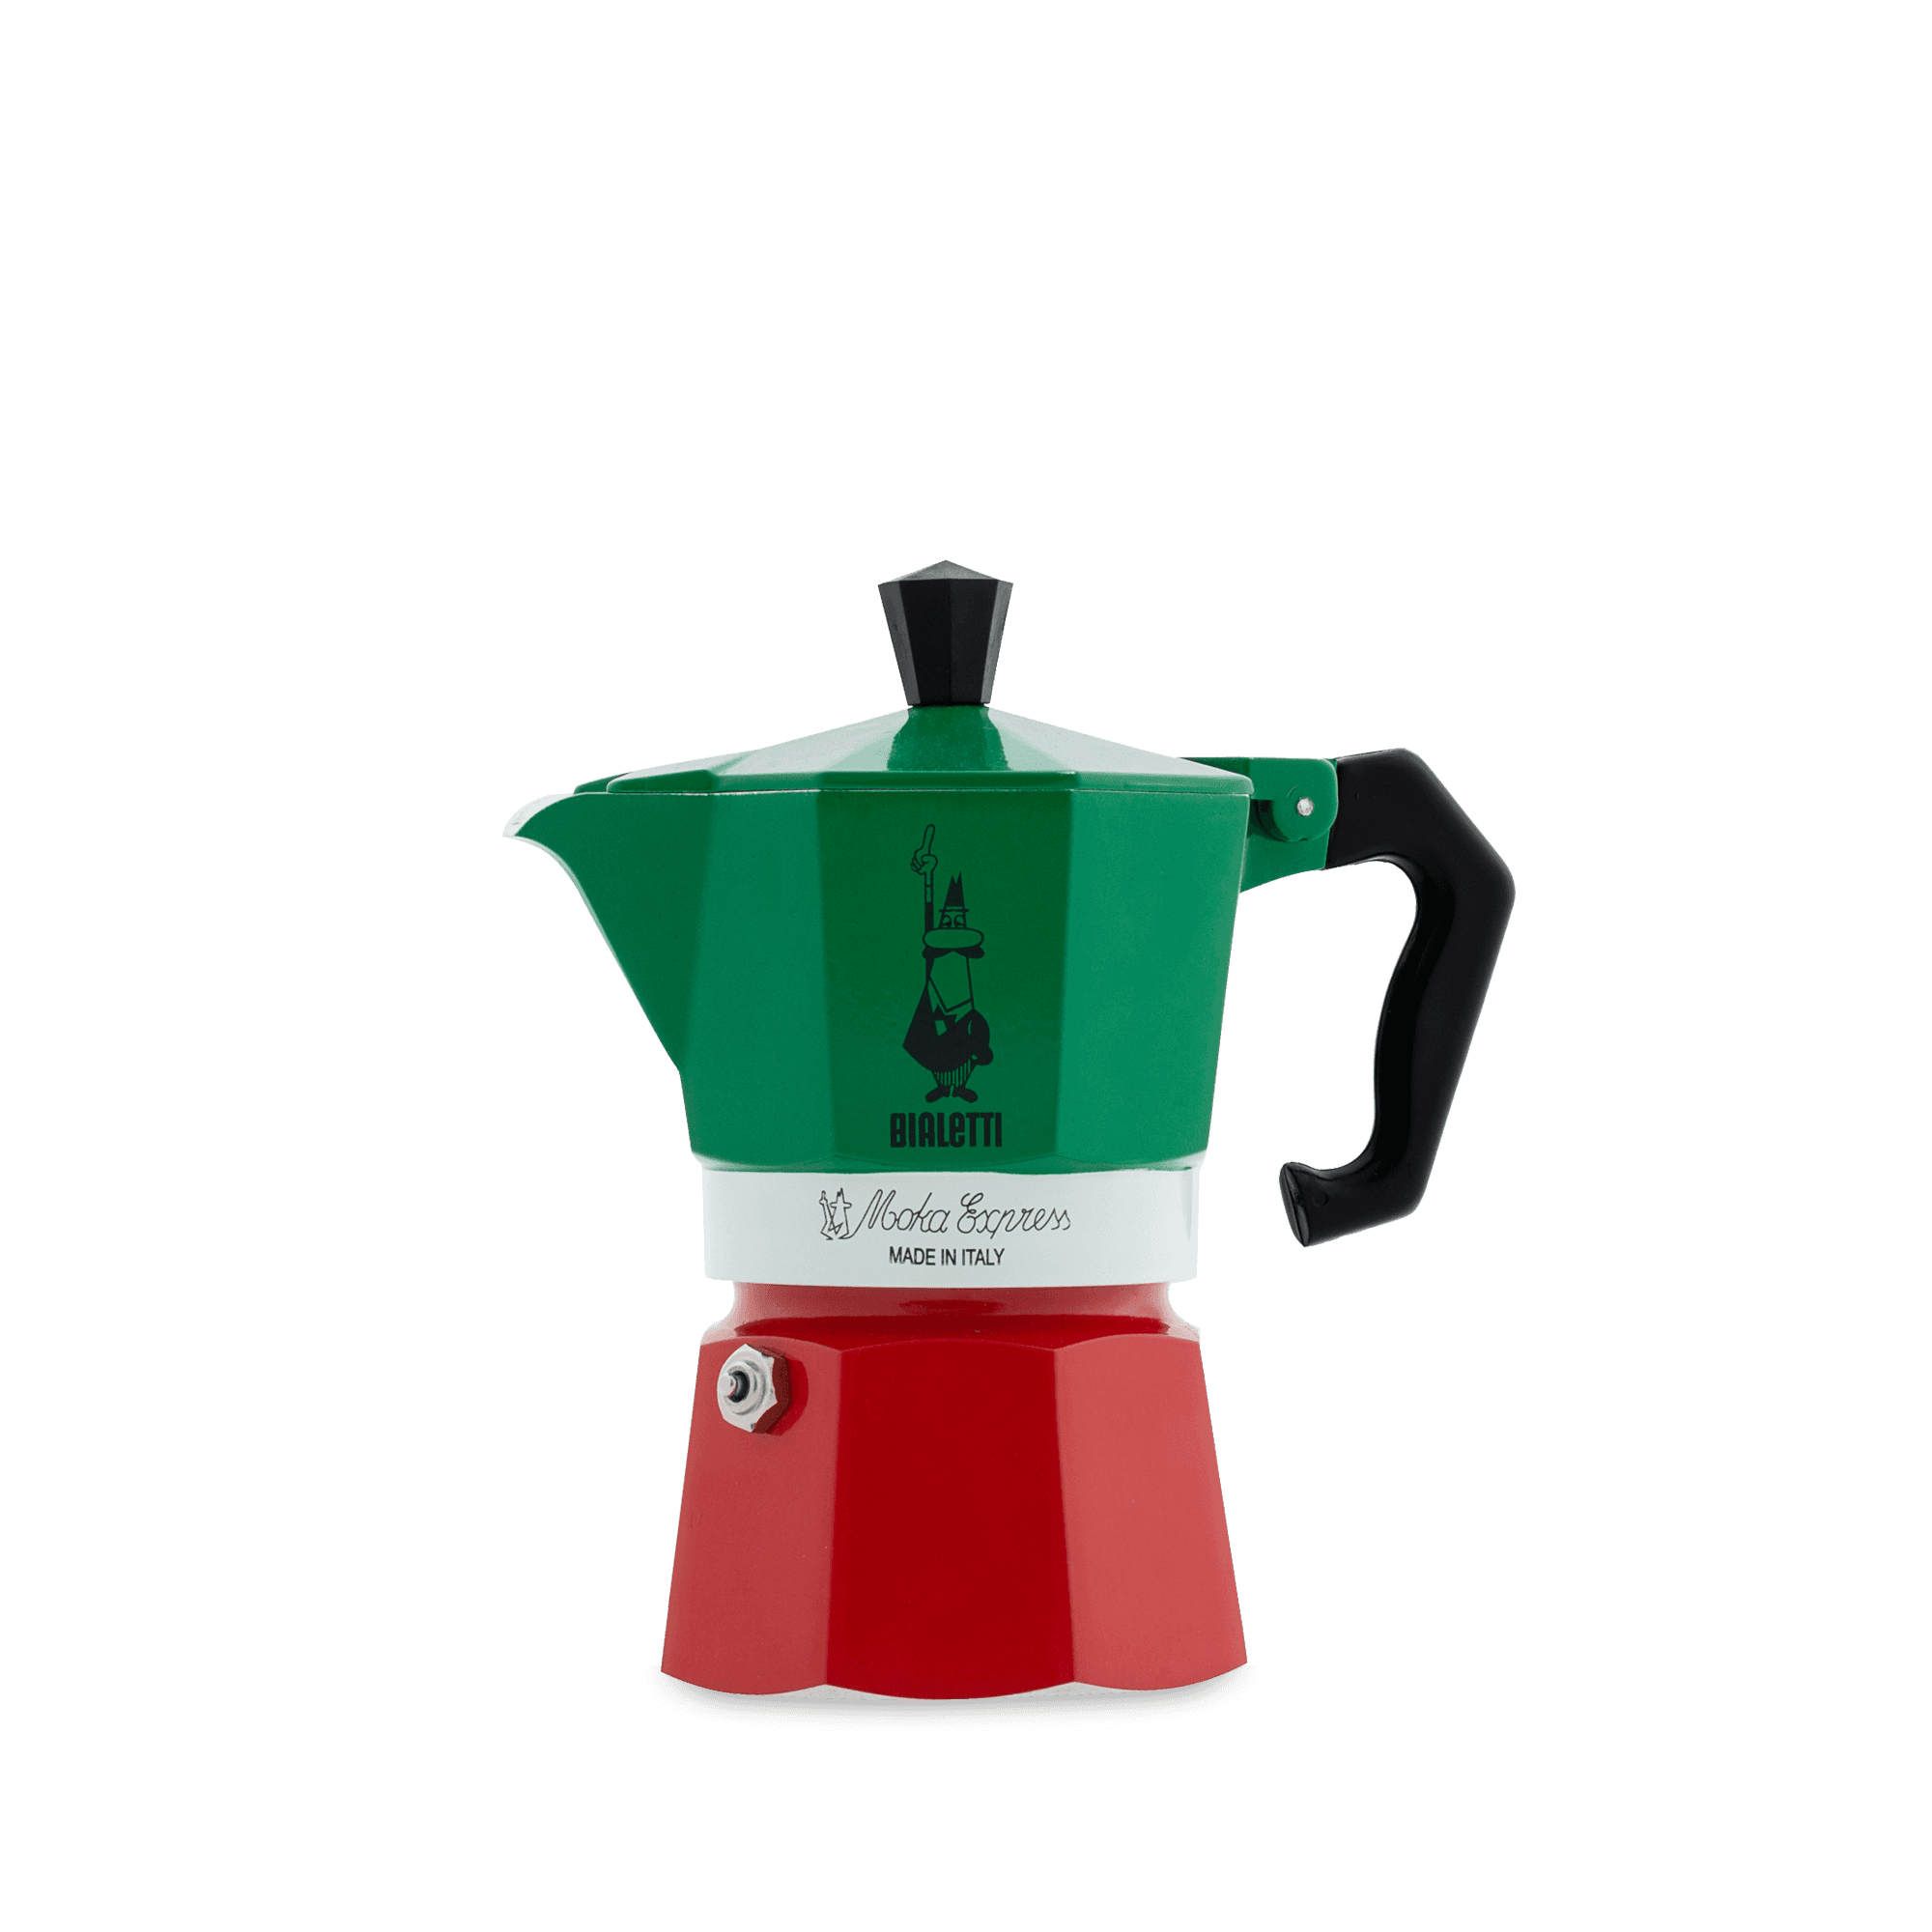 Red and green Italian coffee maker Bialetti 3 cups